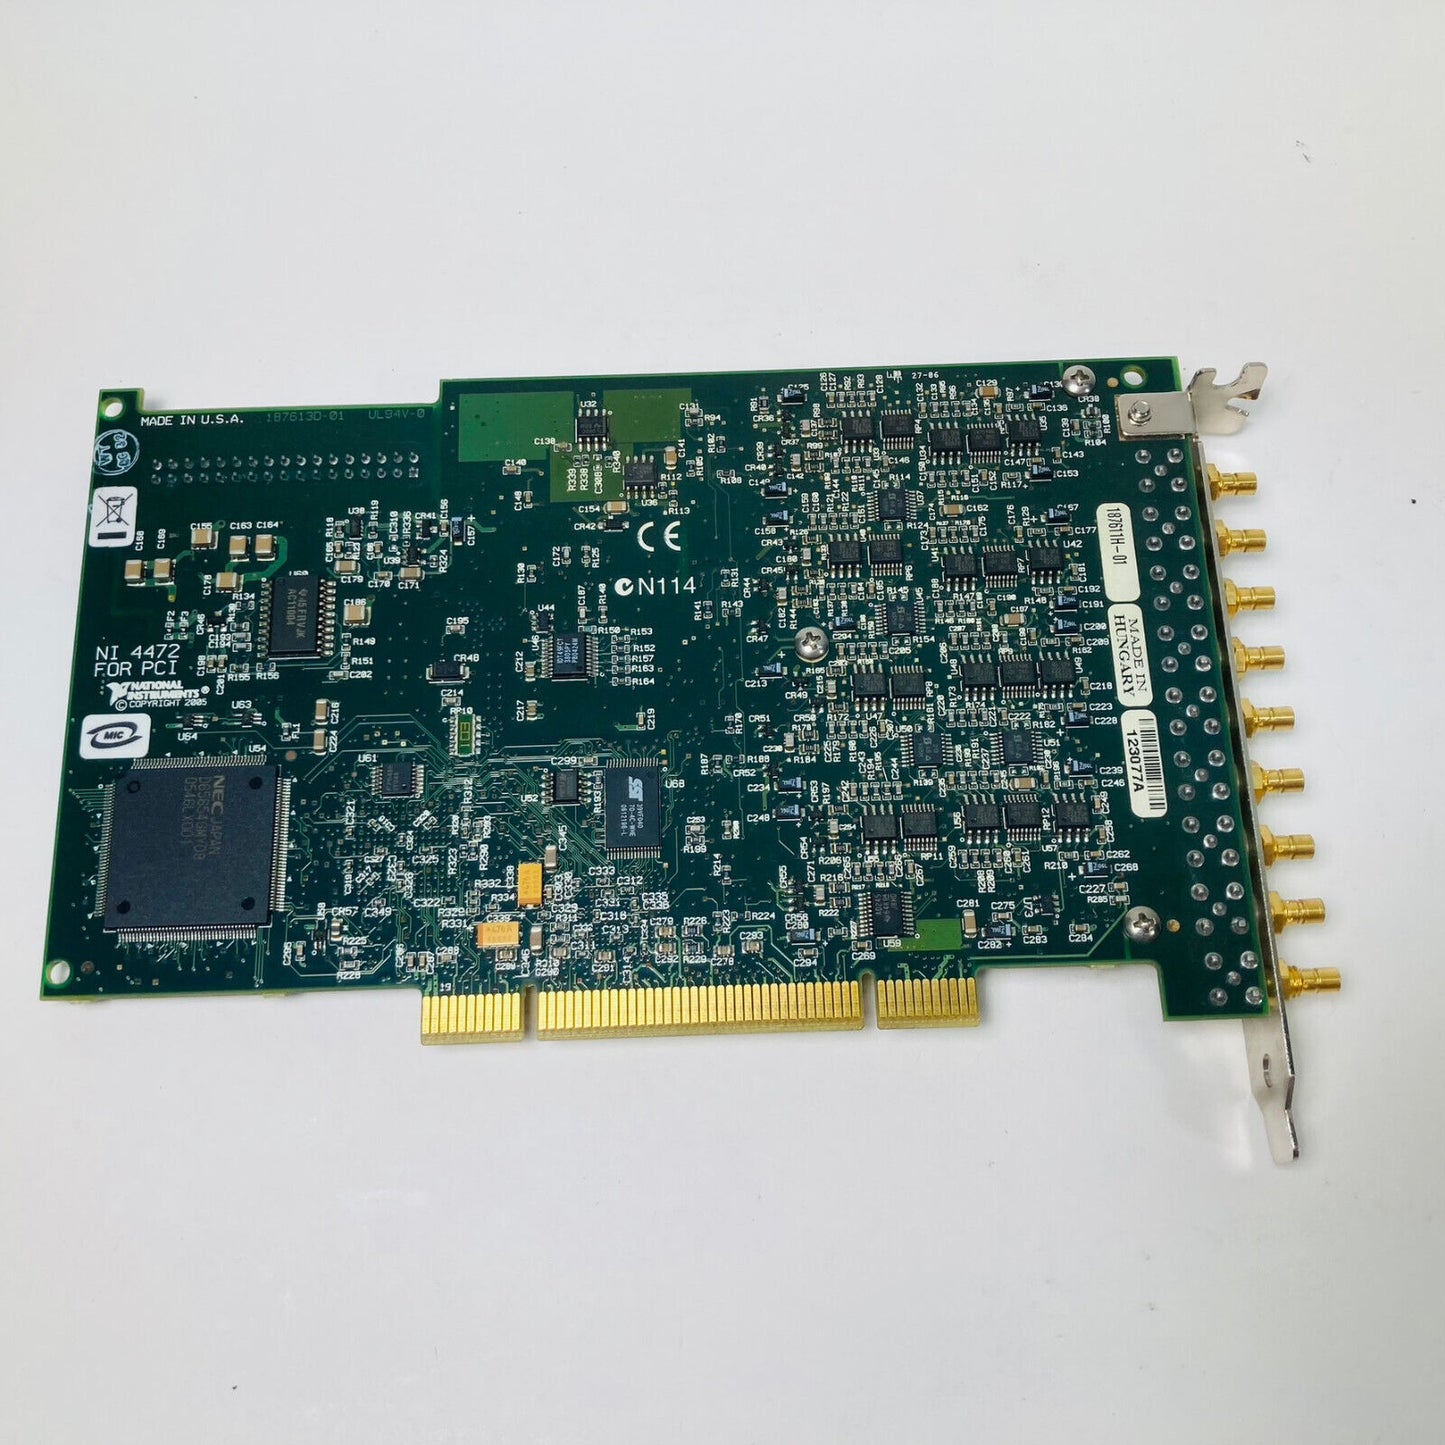 National Instruments PCI-4472 NI Sound and Vibration Device, 8 Input Channels